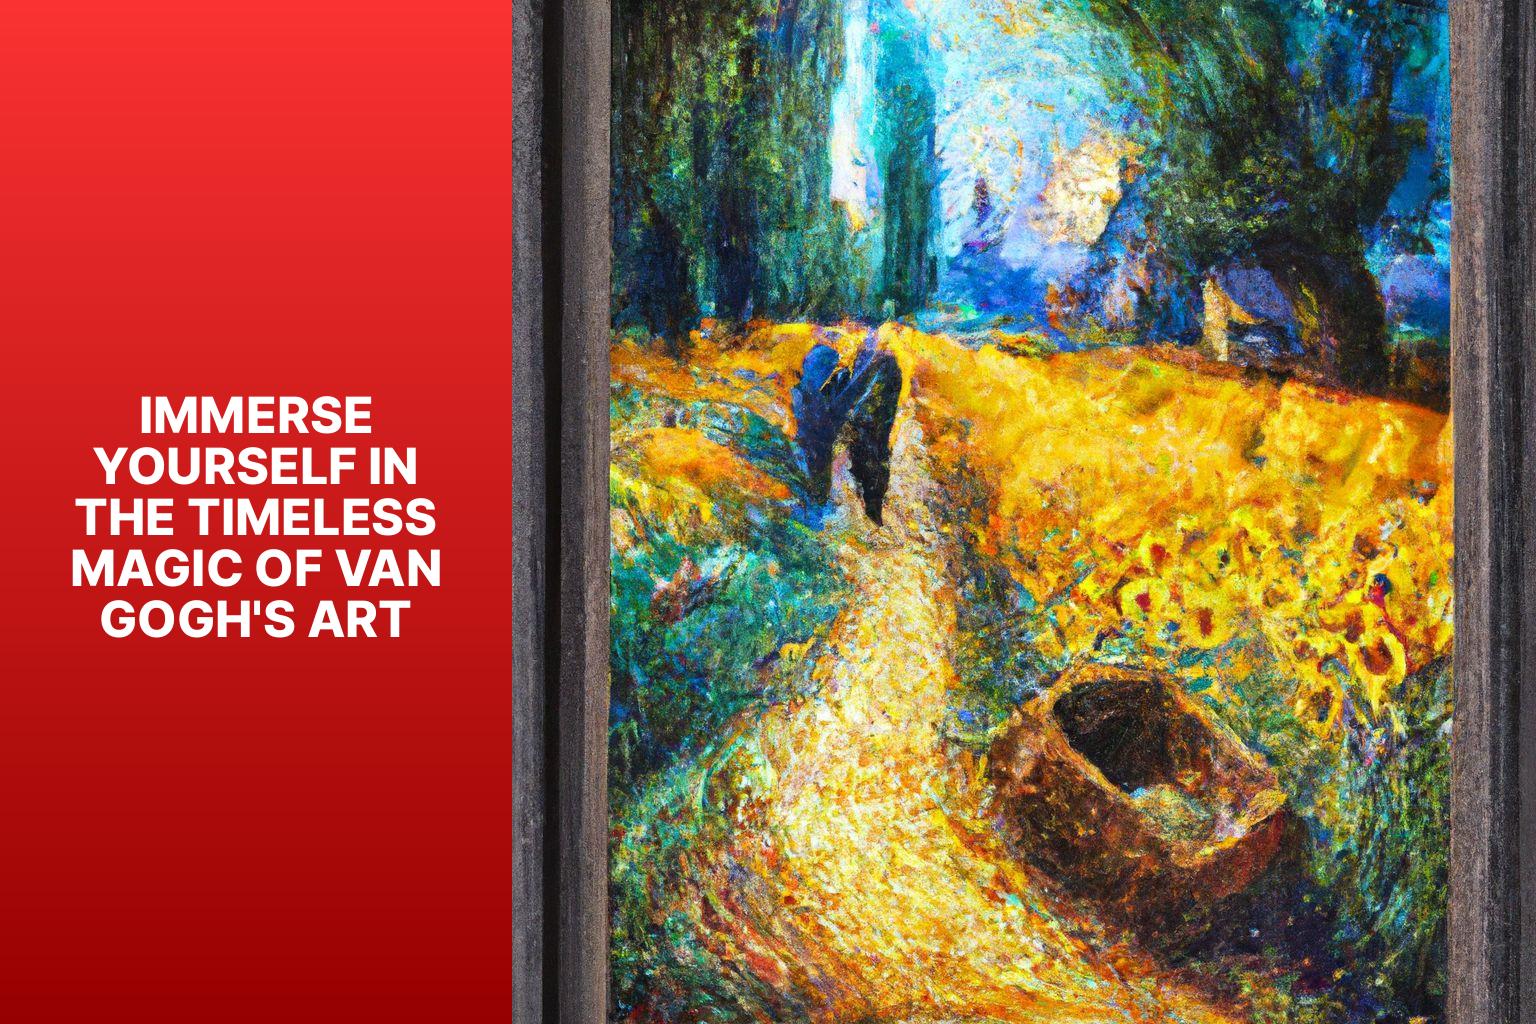 Immerse Yourself in the Timeless Magic of Van Gogh